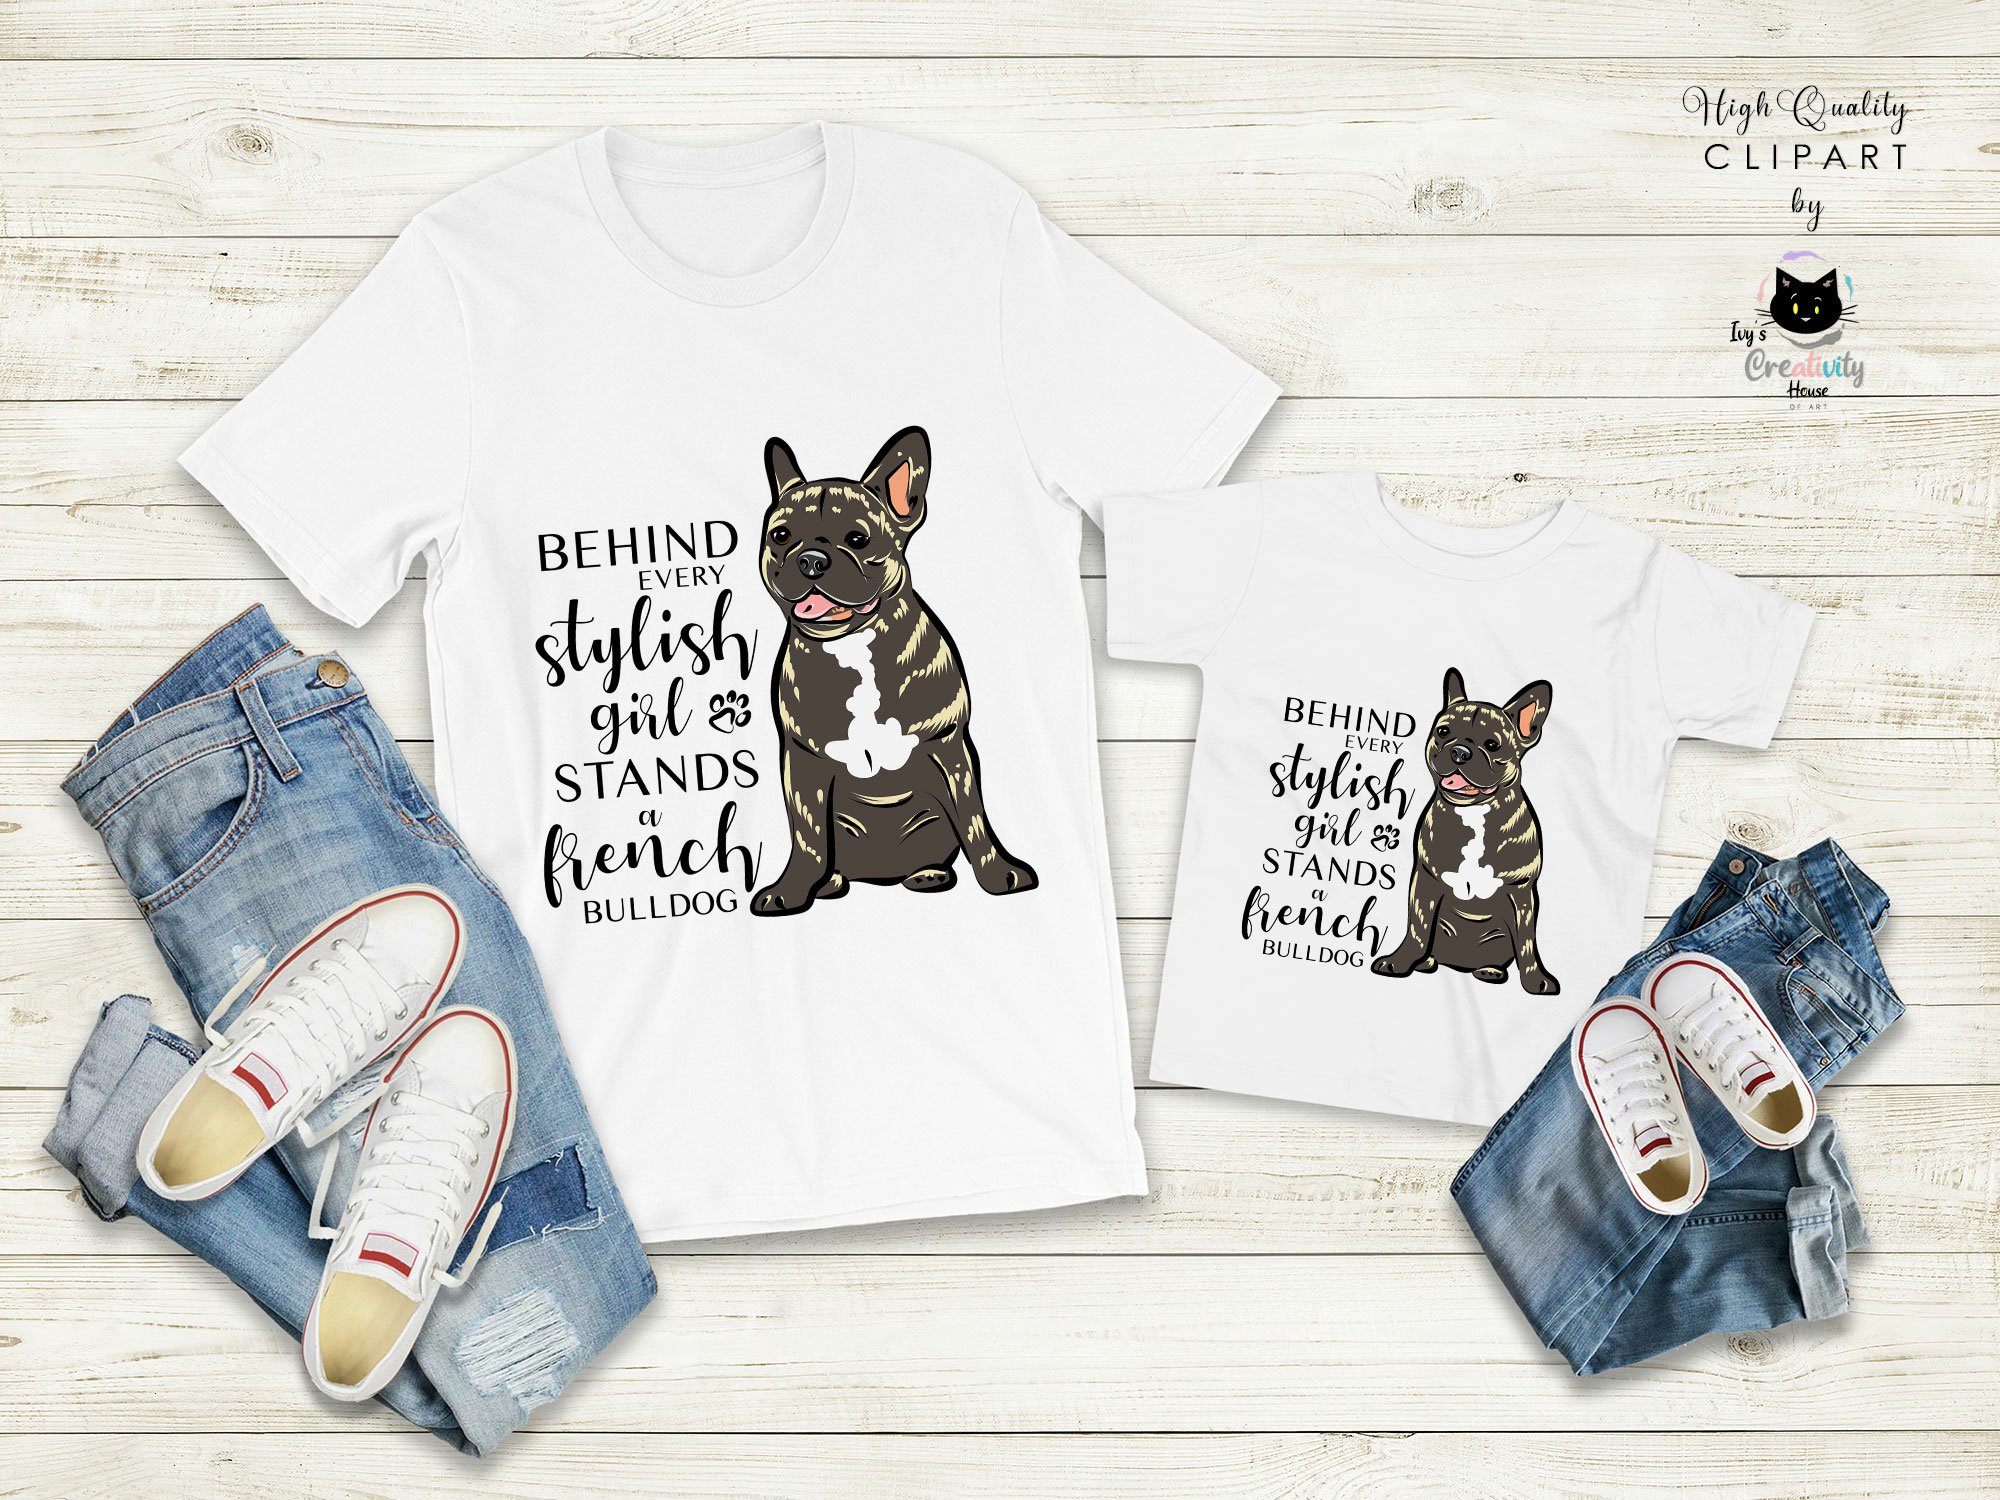 Couple of shirts with a dog on them.